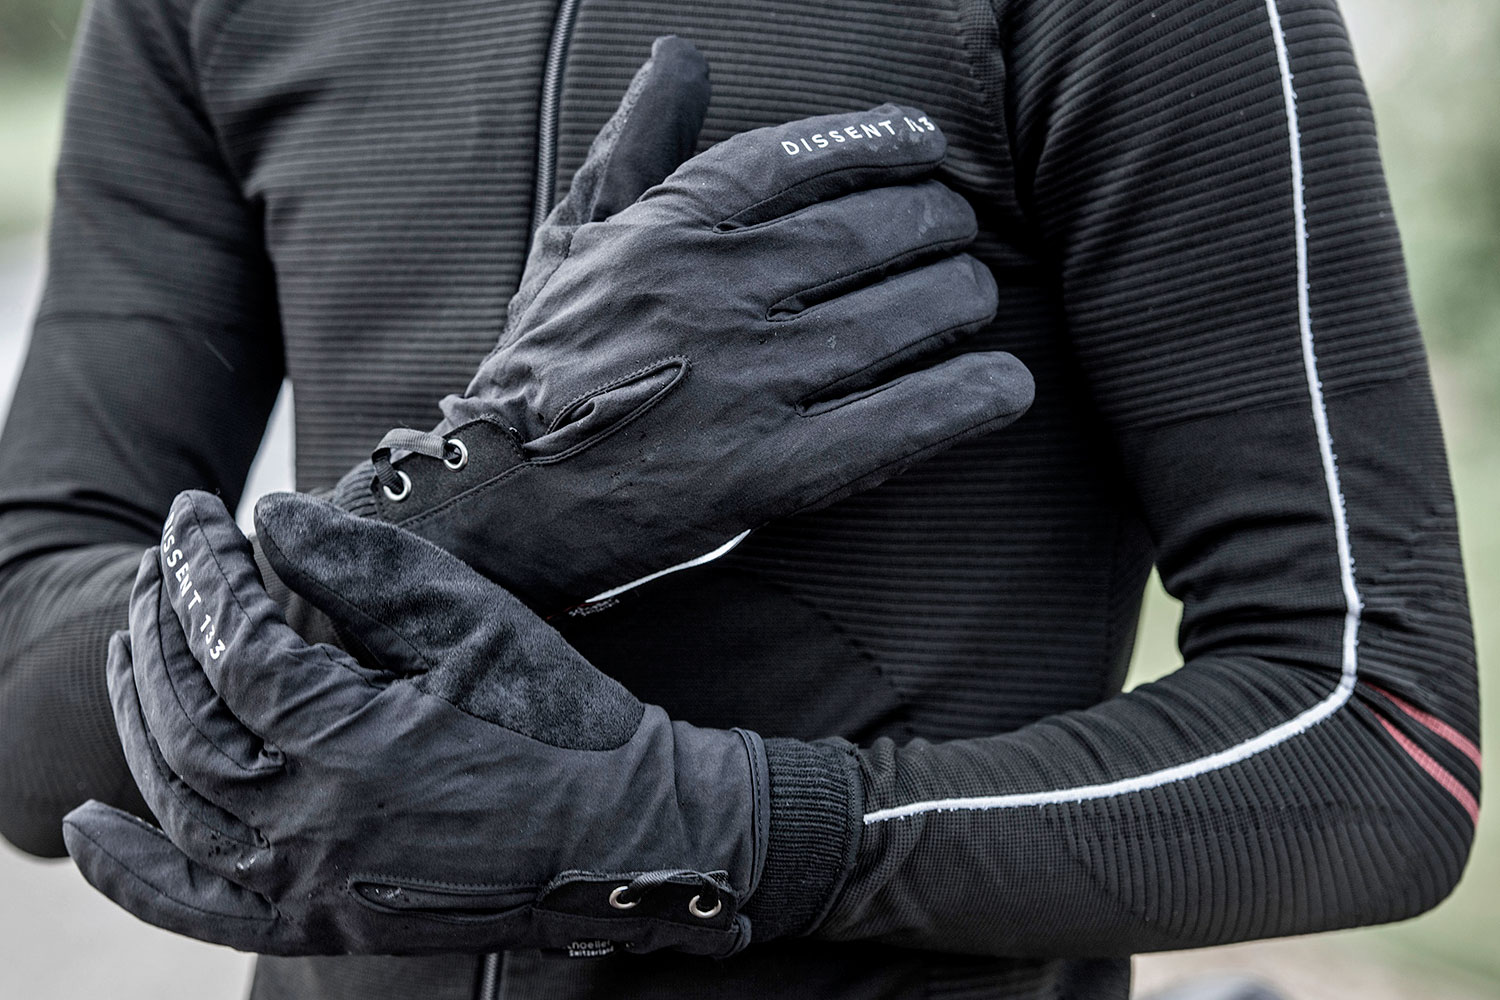 Dissent 133 by TheRiderFirm layered winter biking gloves wet cold cycling glove system